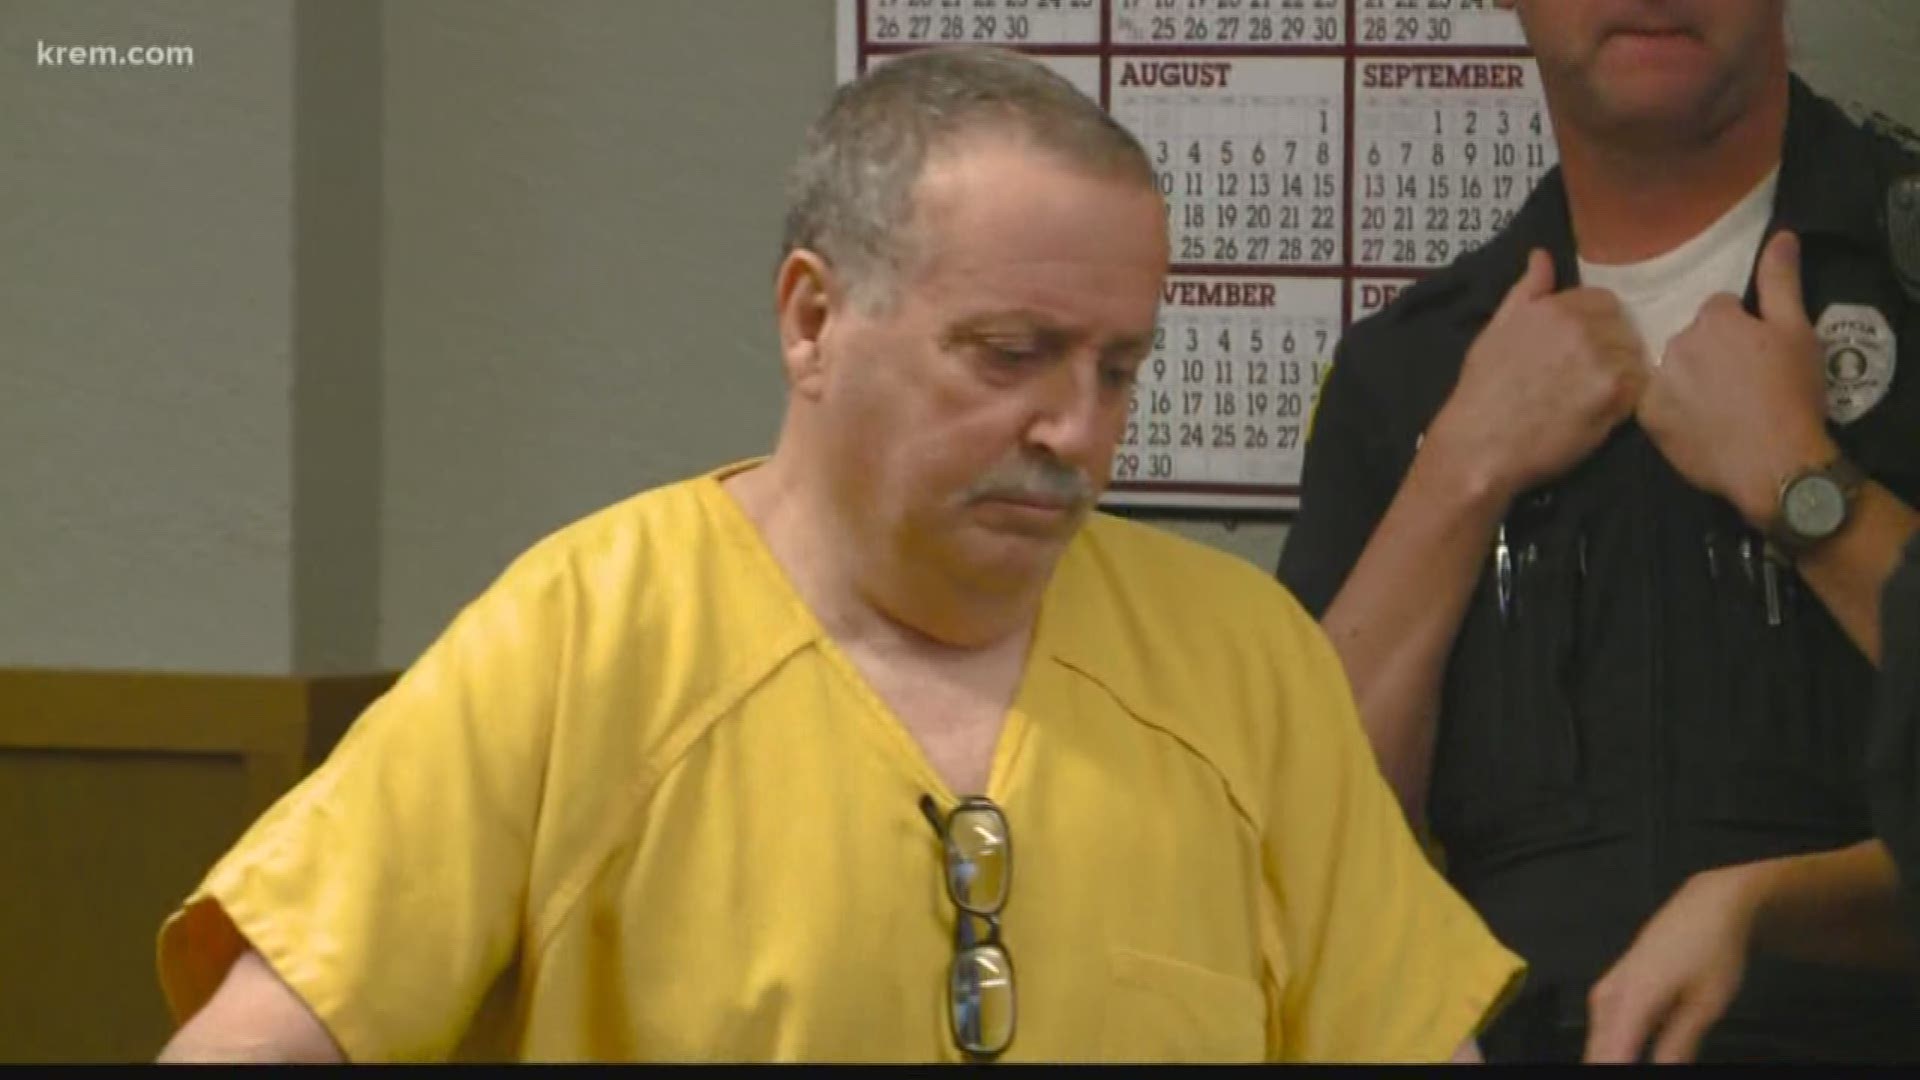 A judge ruled upon Dibartolo's Feb. 21 release, when he will be put into community custody under Washington Department of Corrections supervision.